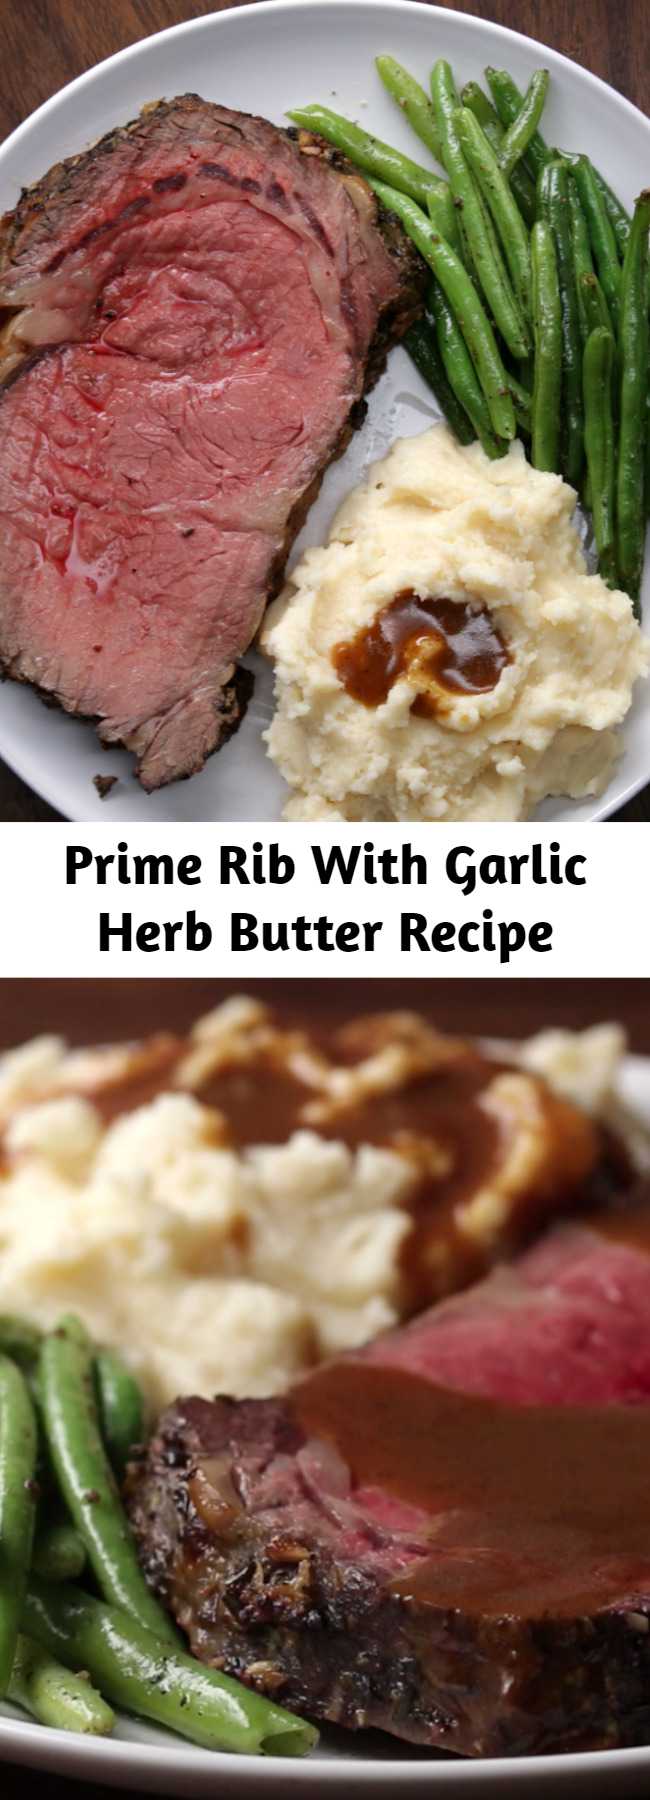 Prime Rib With Garlic Herb Butter Recipe